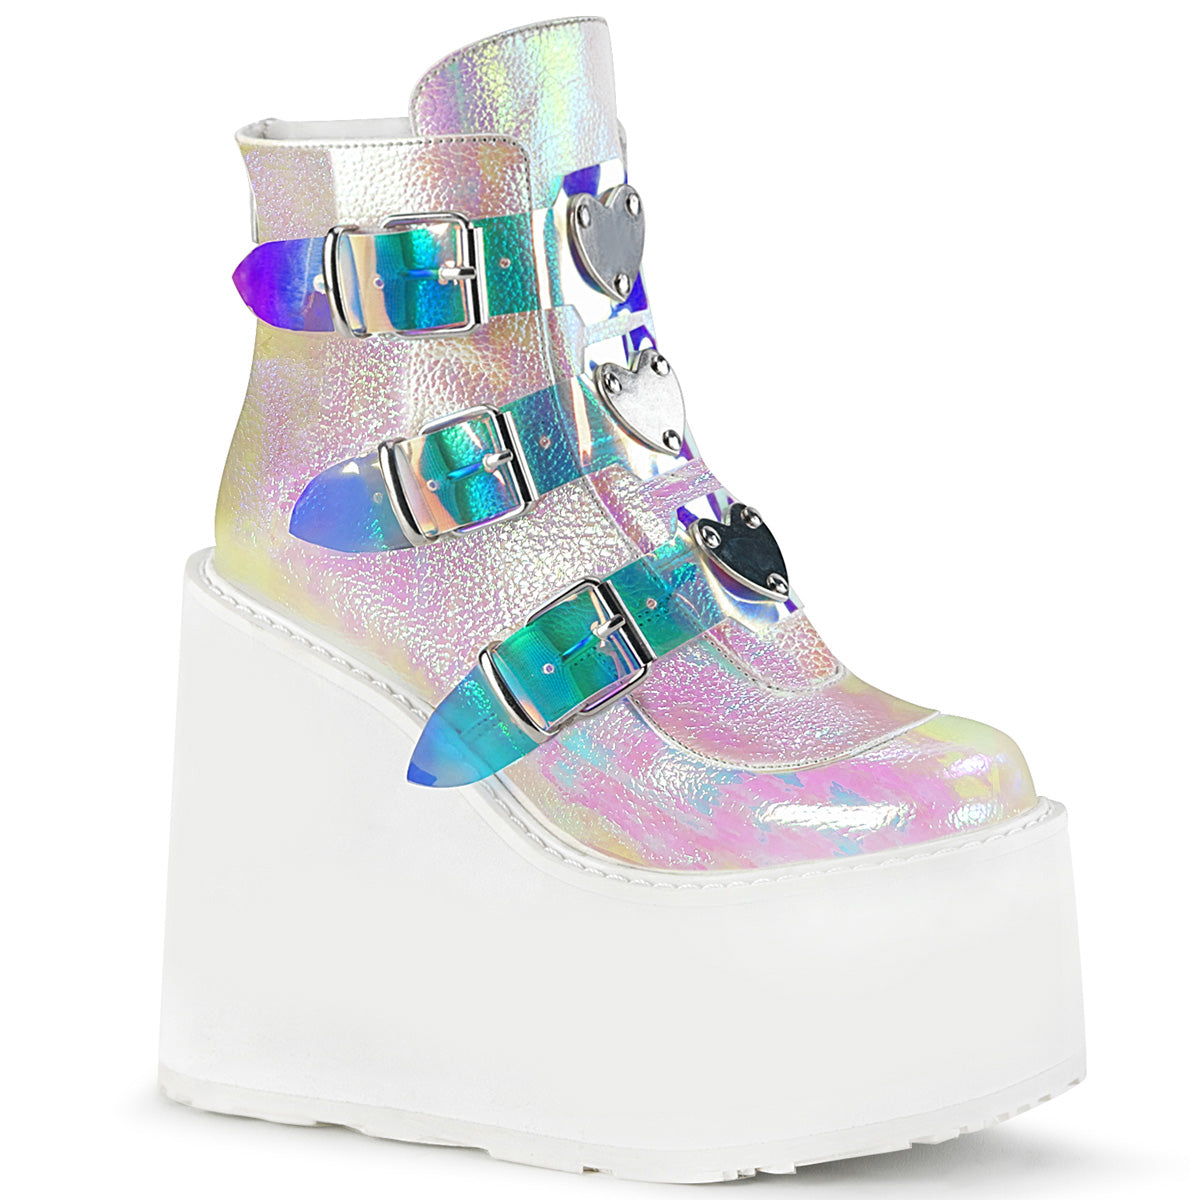 DemoniaCult Womens Ankle Boots SWING-105 Pearl Iridescent Vegan Leather